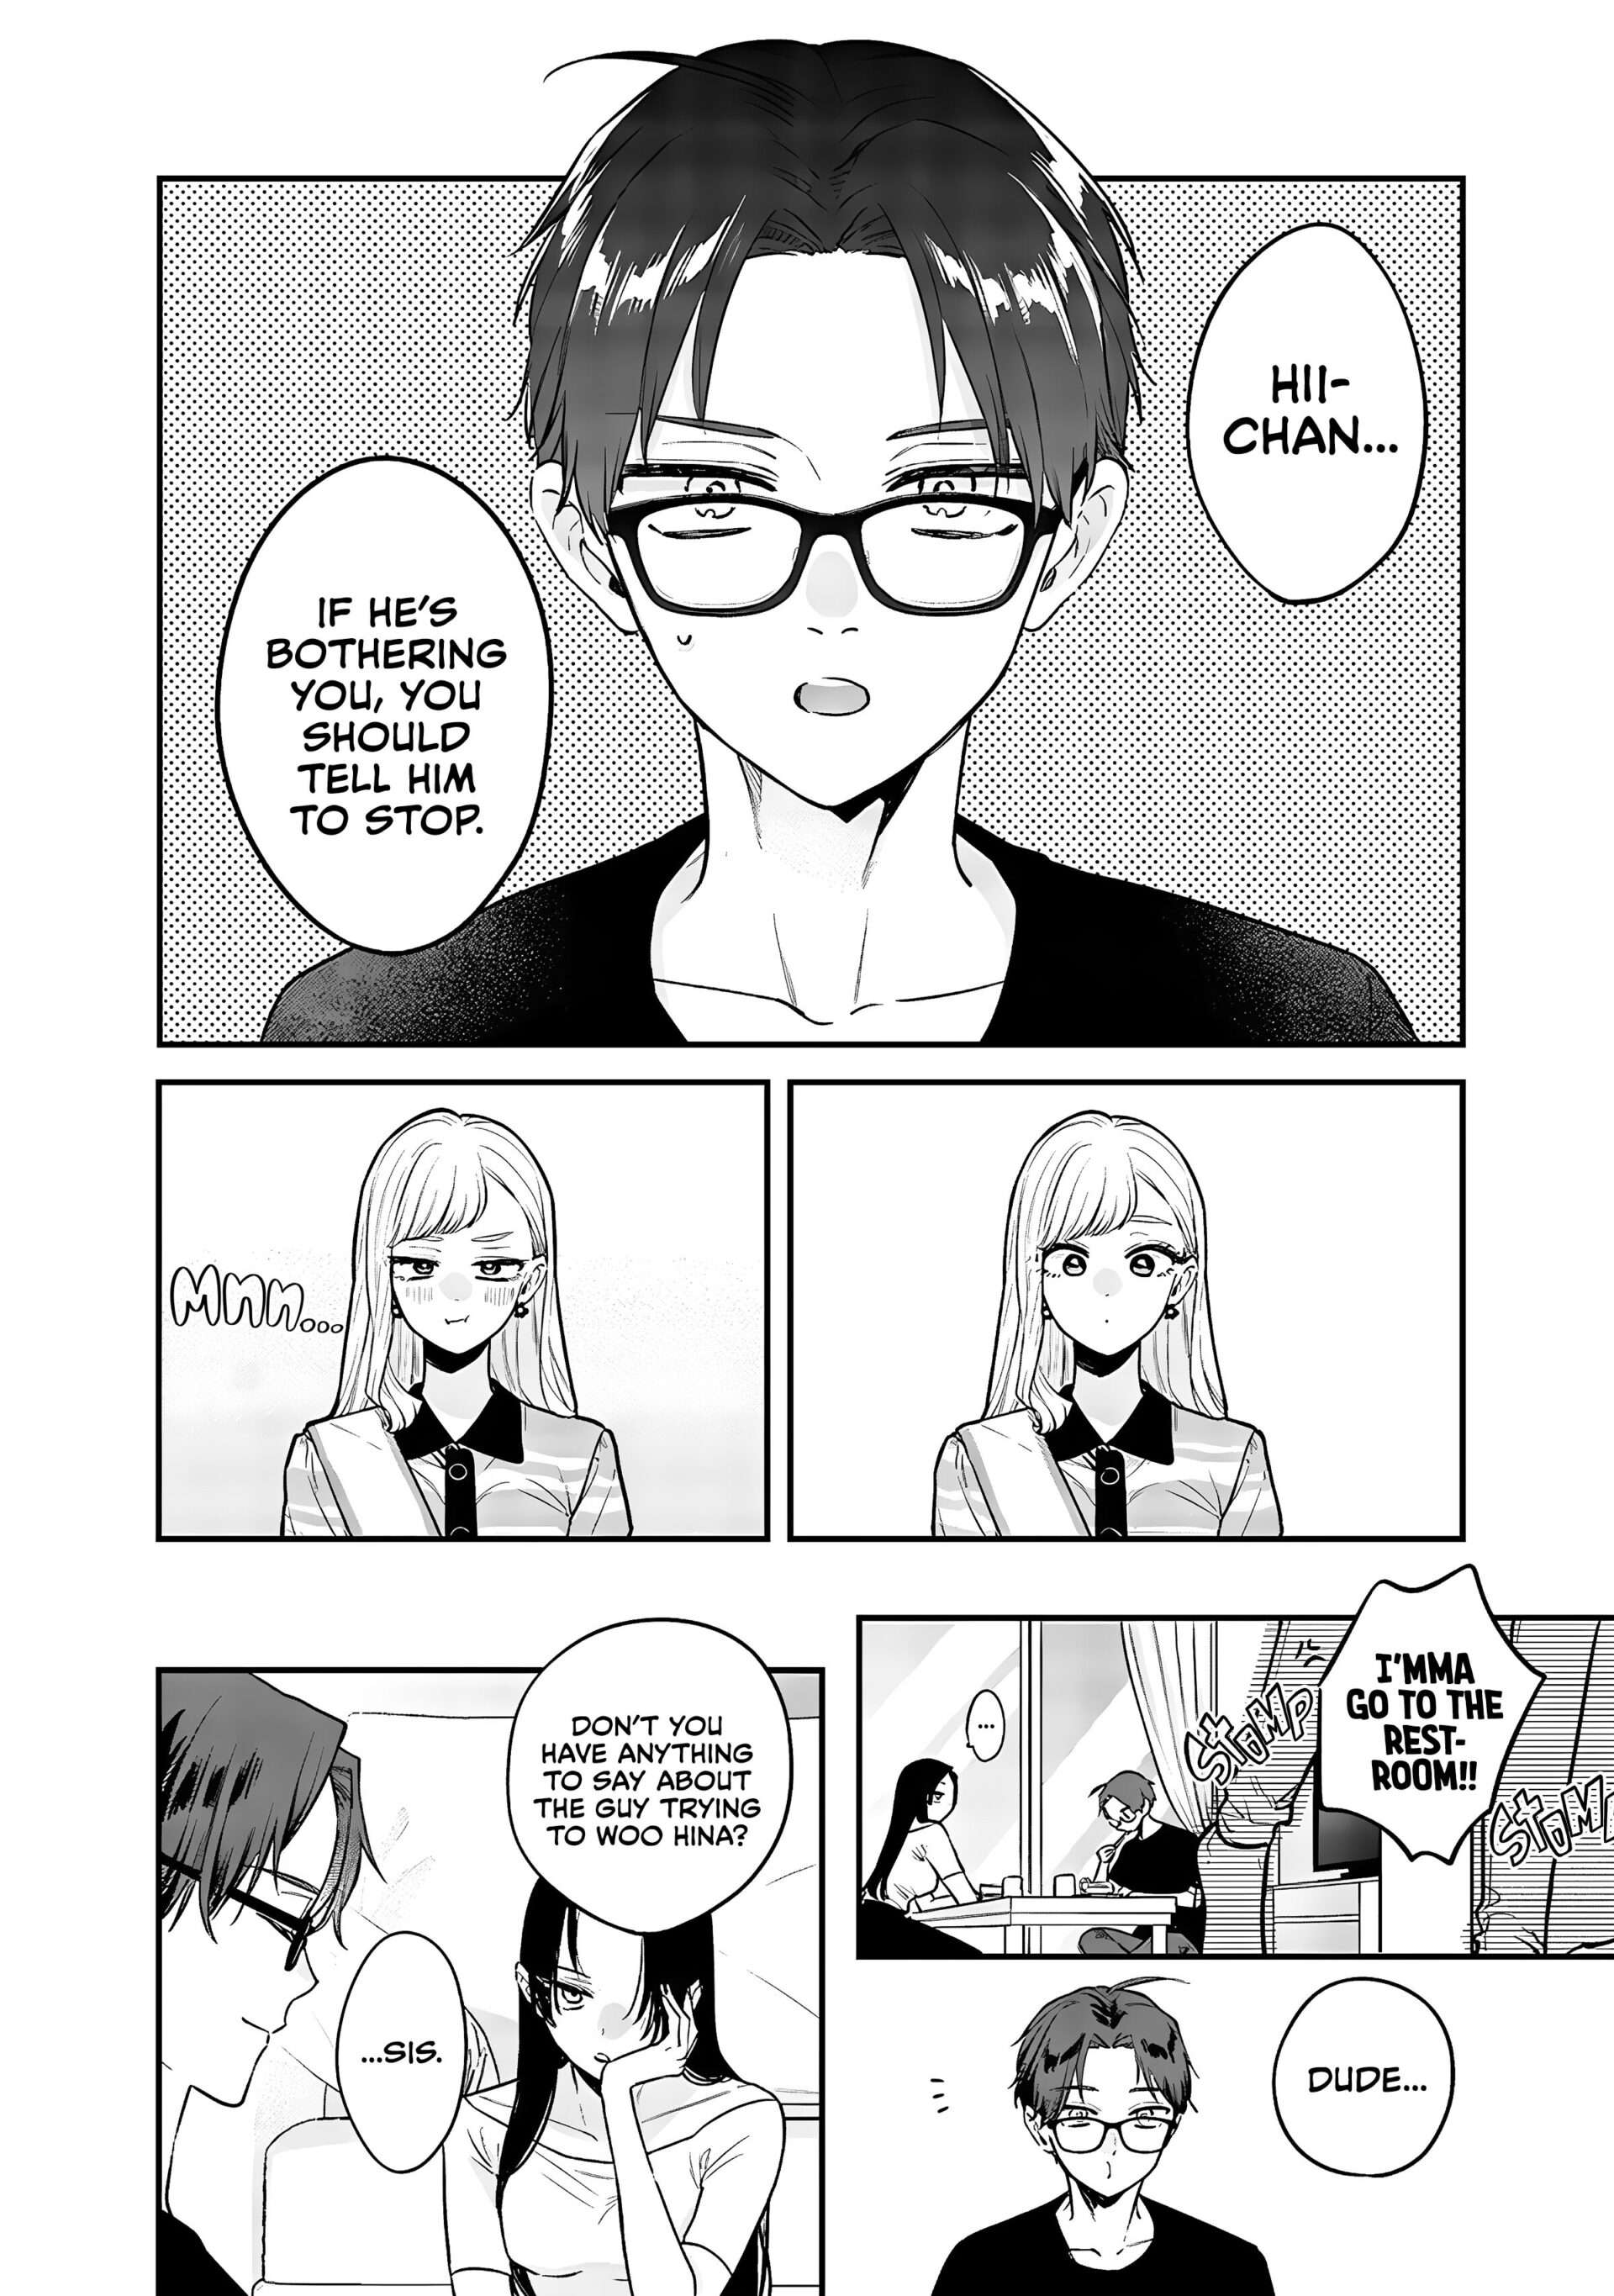 The Cutest Girl Closest To Me - chapter 7.5 - #4